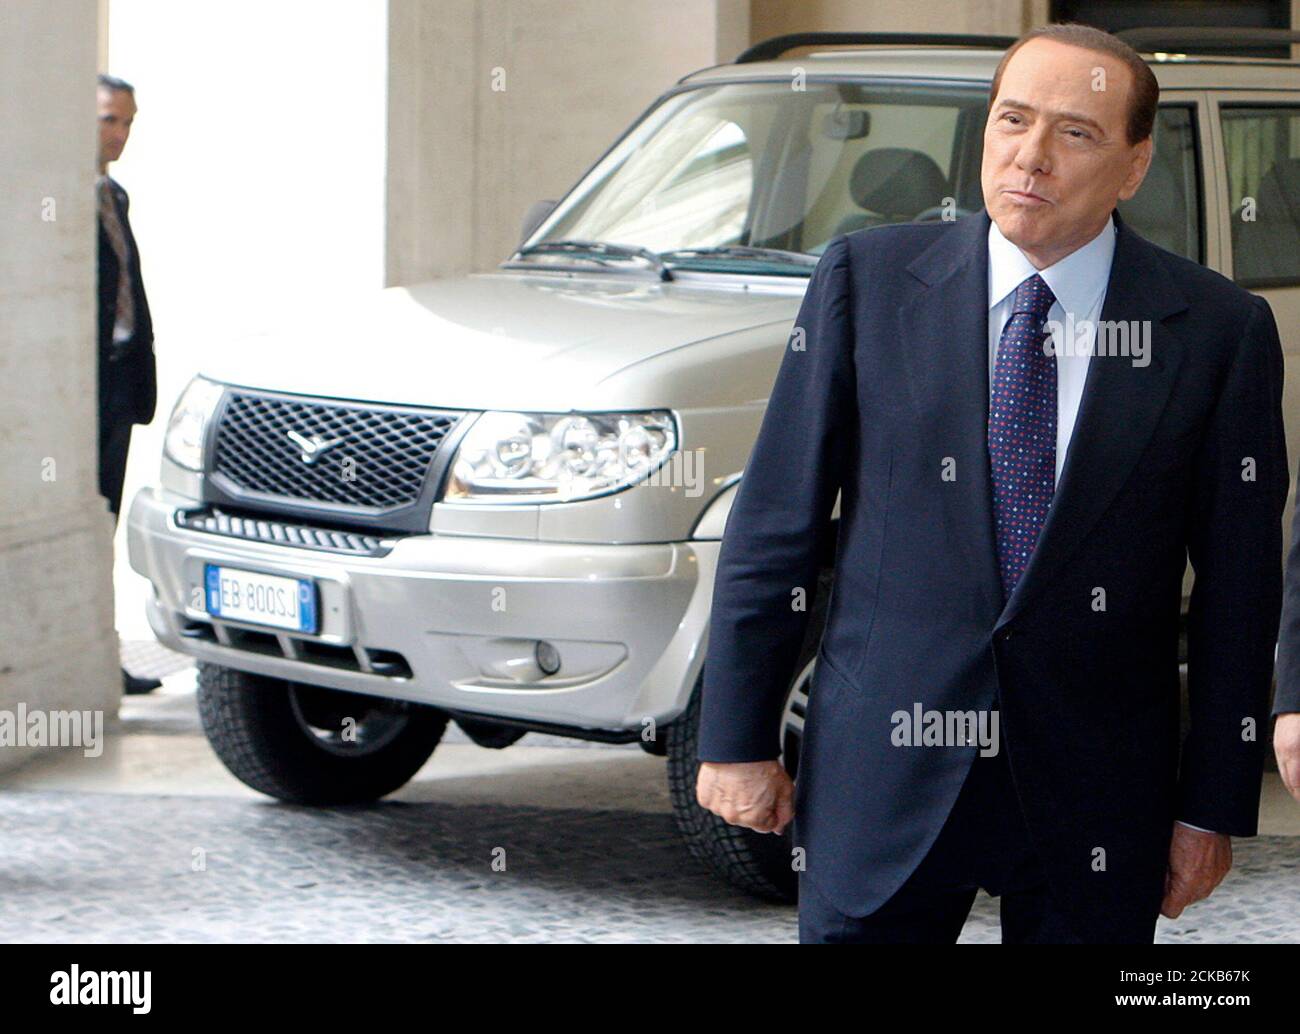 Italy's Prime Minister Silvio Berlusconi poses near the "Patriot", a new  car model by auto maker Sollers, at the Chigi Palace in Rome April 23,  2010. The new sport utility vehicle is